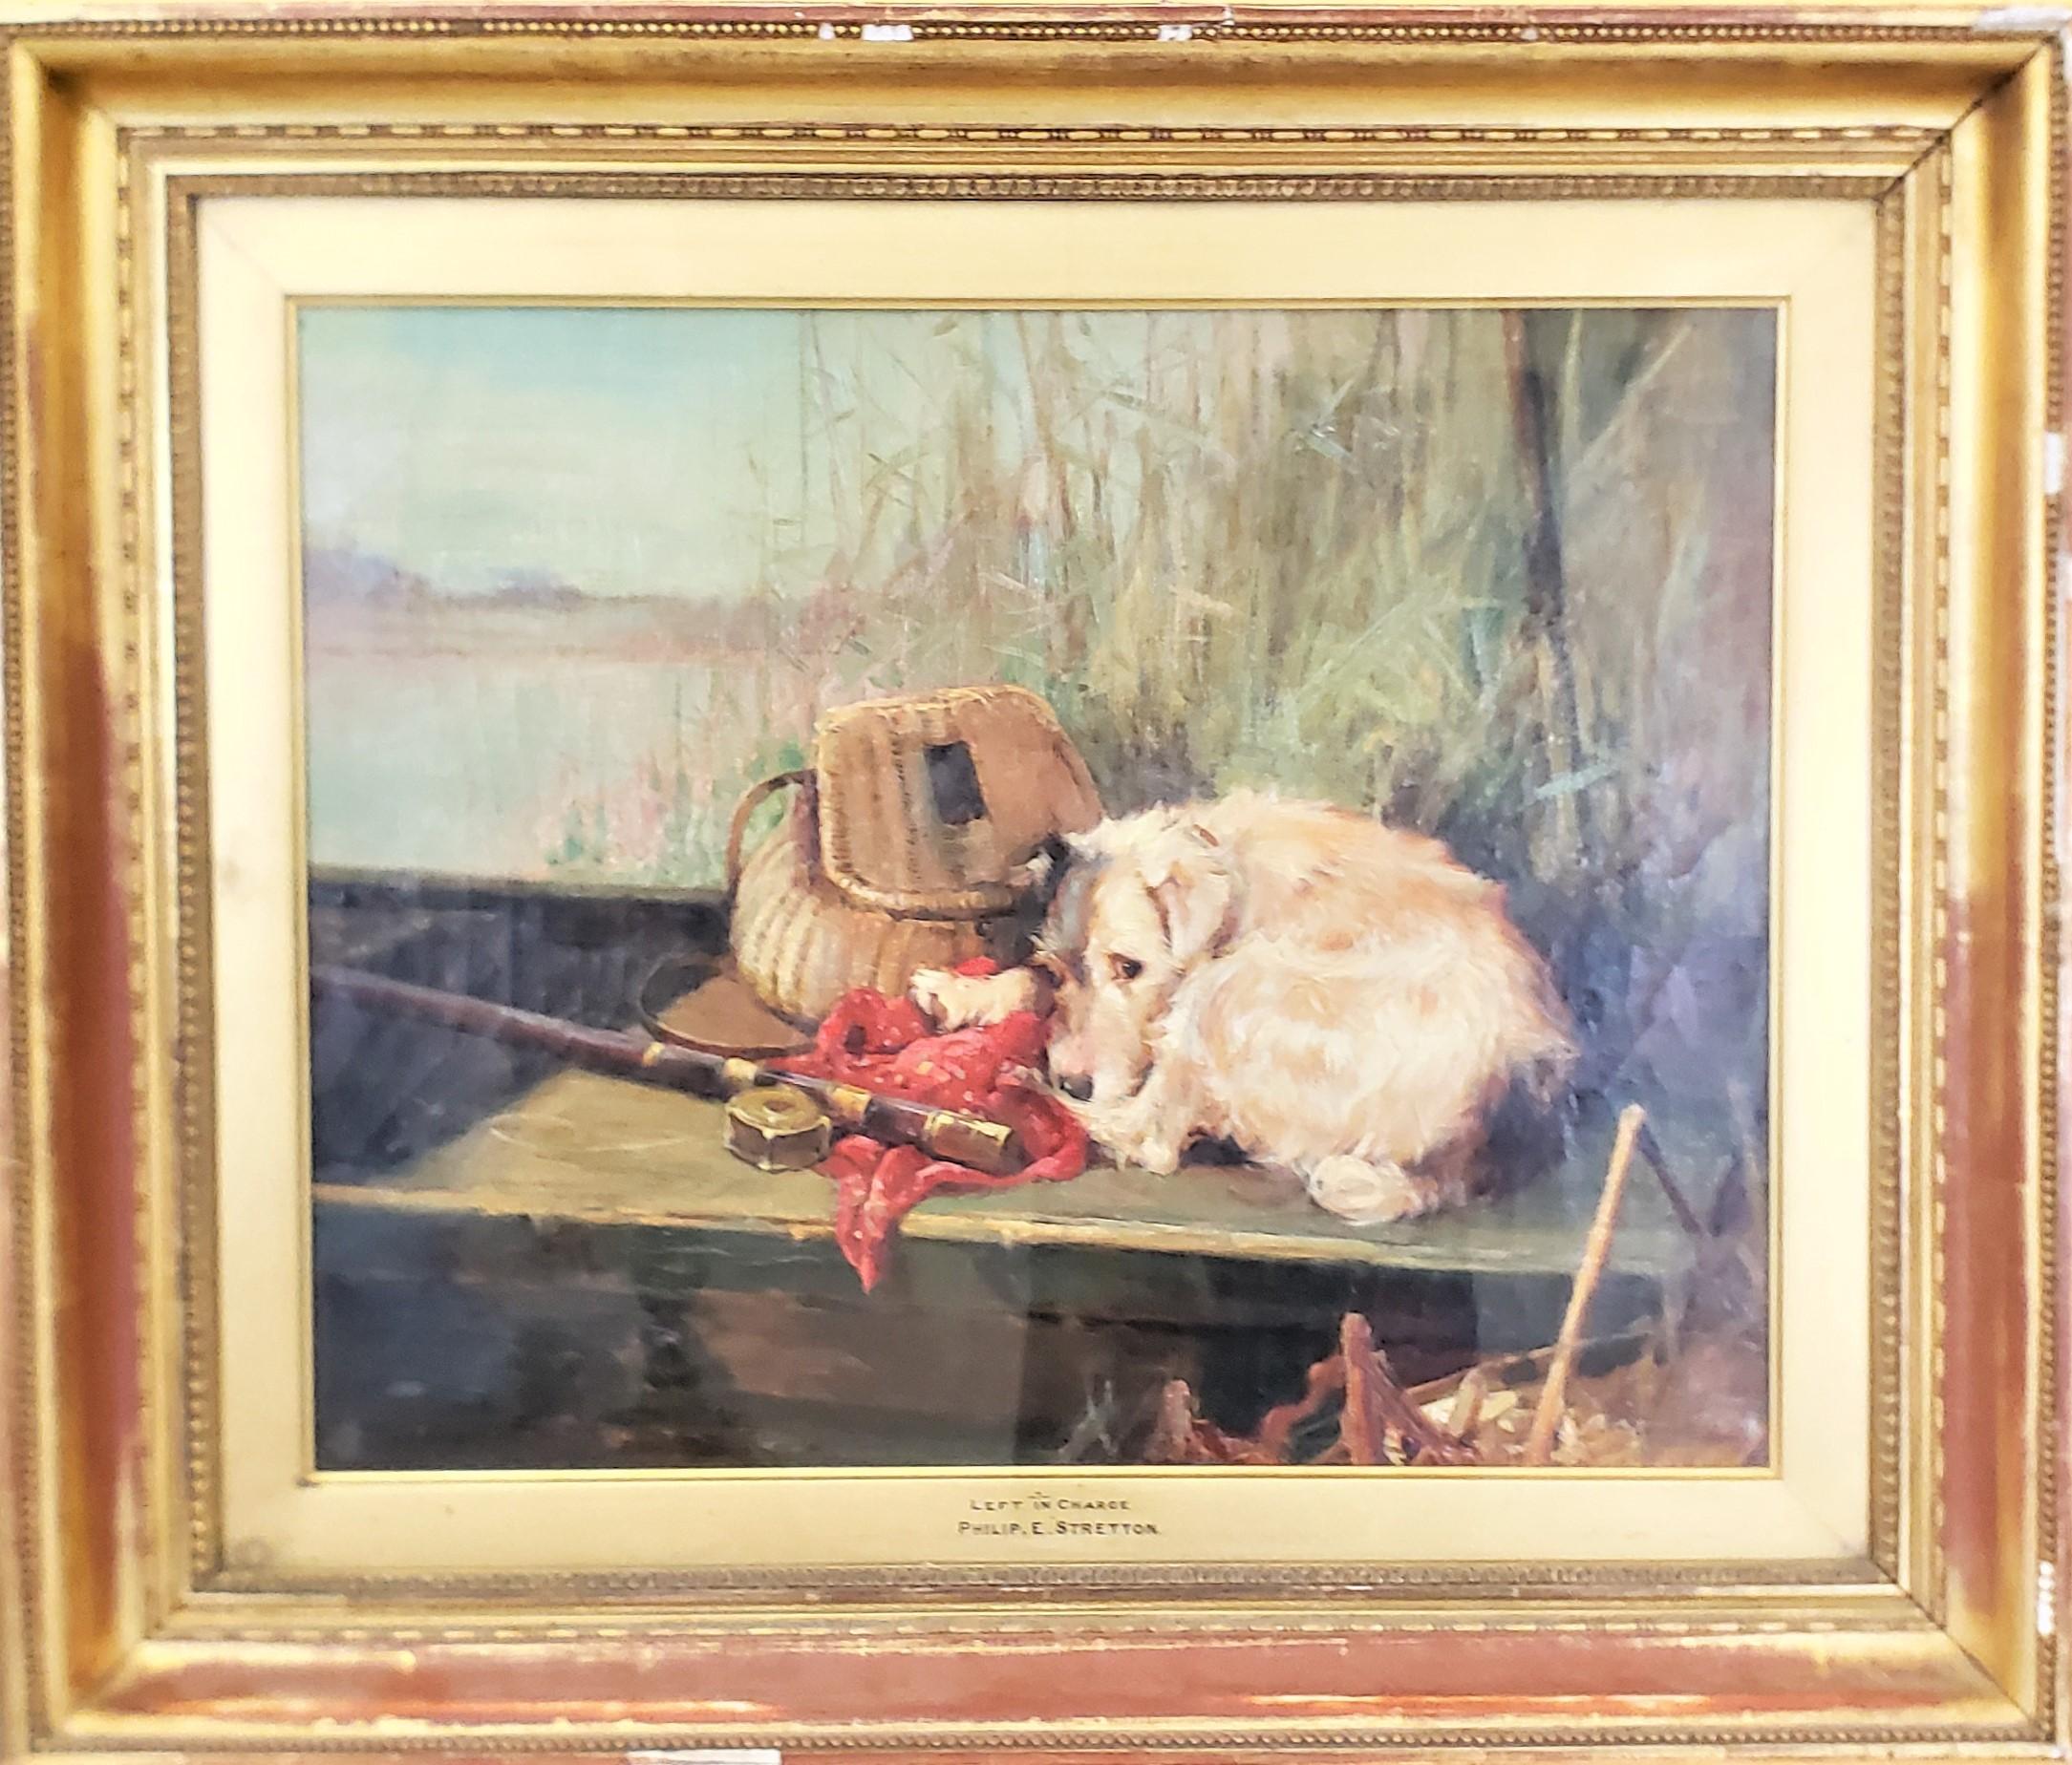 This antique painting was dome by the very well known Philip Eustice Stretton of England in approximately 1900 in the period Victorian style. This original painting is done with oil on canvas and depicts a small terrior curled up with a fly fishing